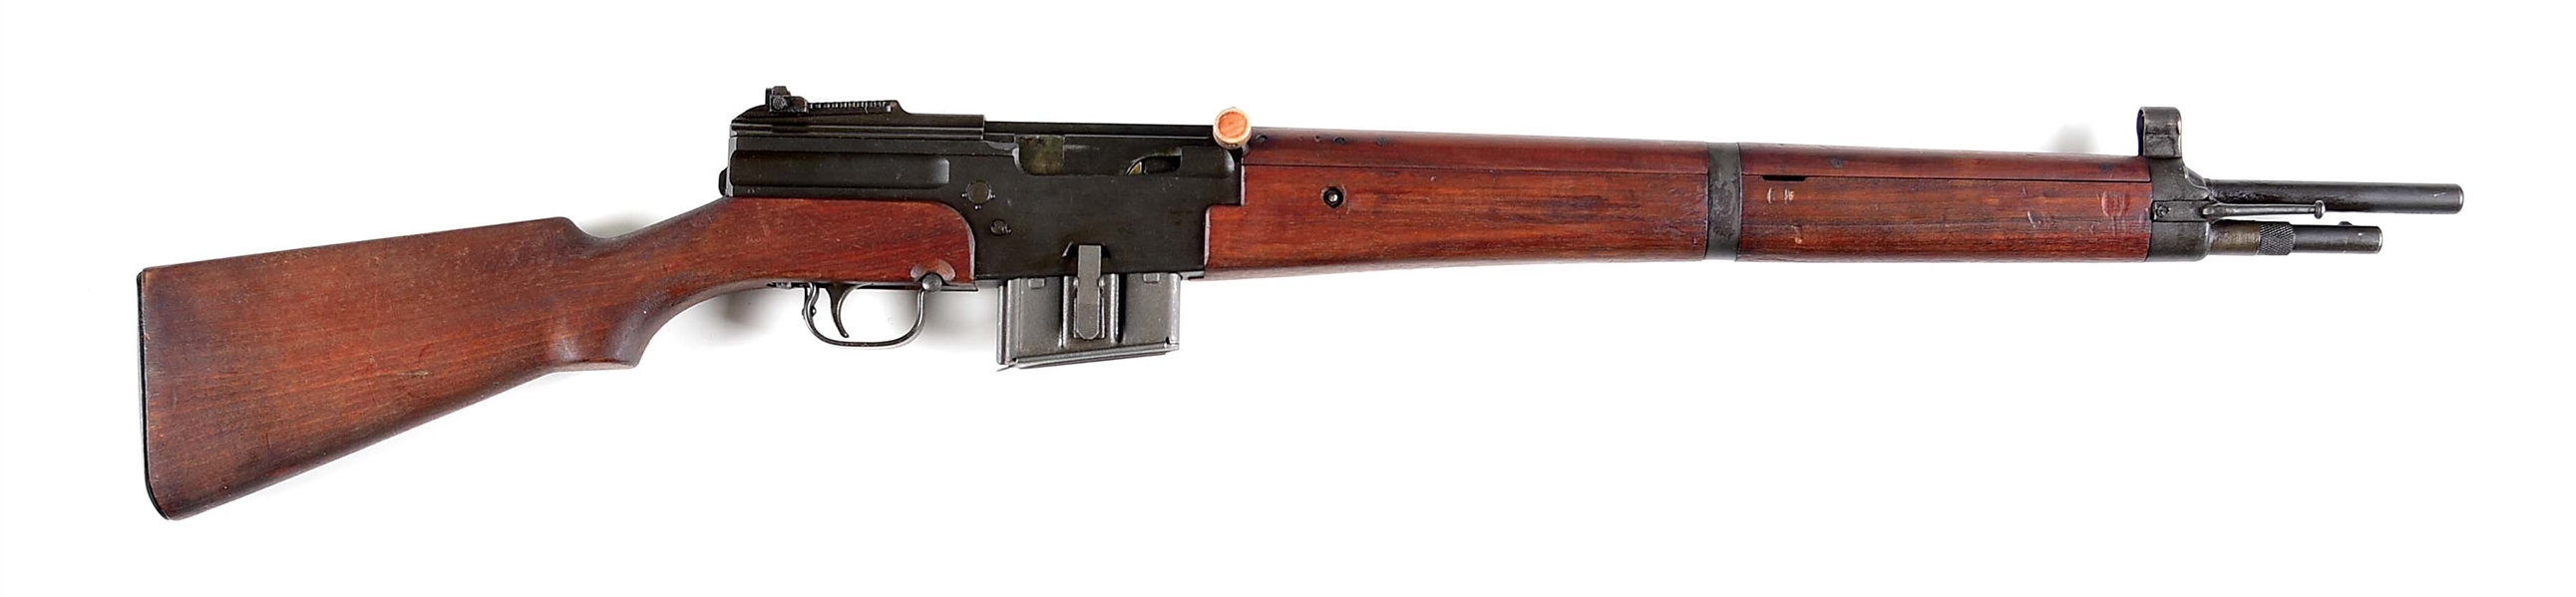 (C) SCARCE AND FINE FRENCH ST. ETIENNE MAS 44 SEMI-AUTOMATIC RIFLE.